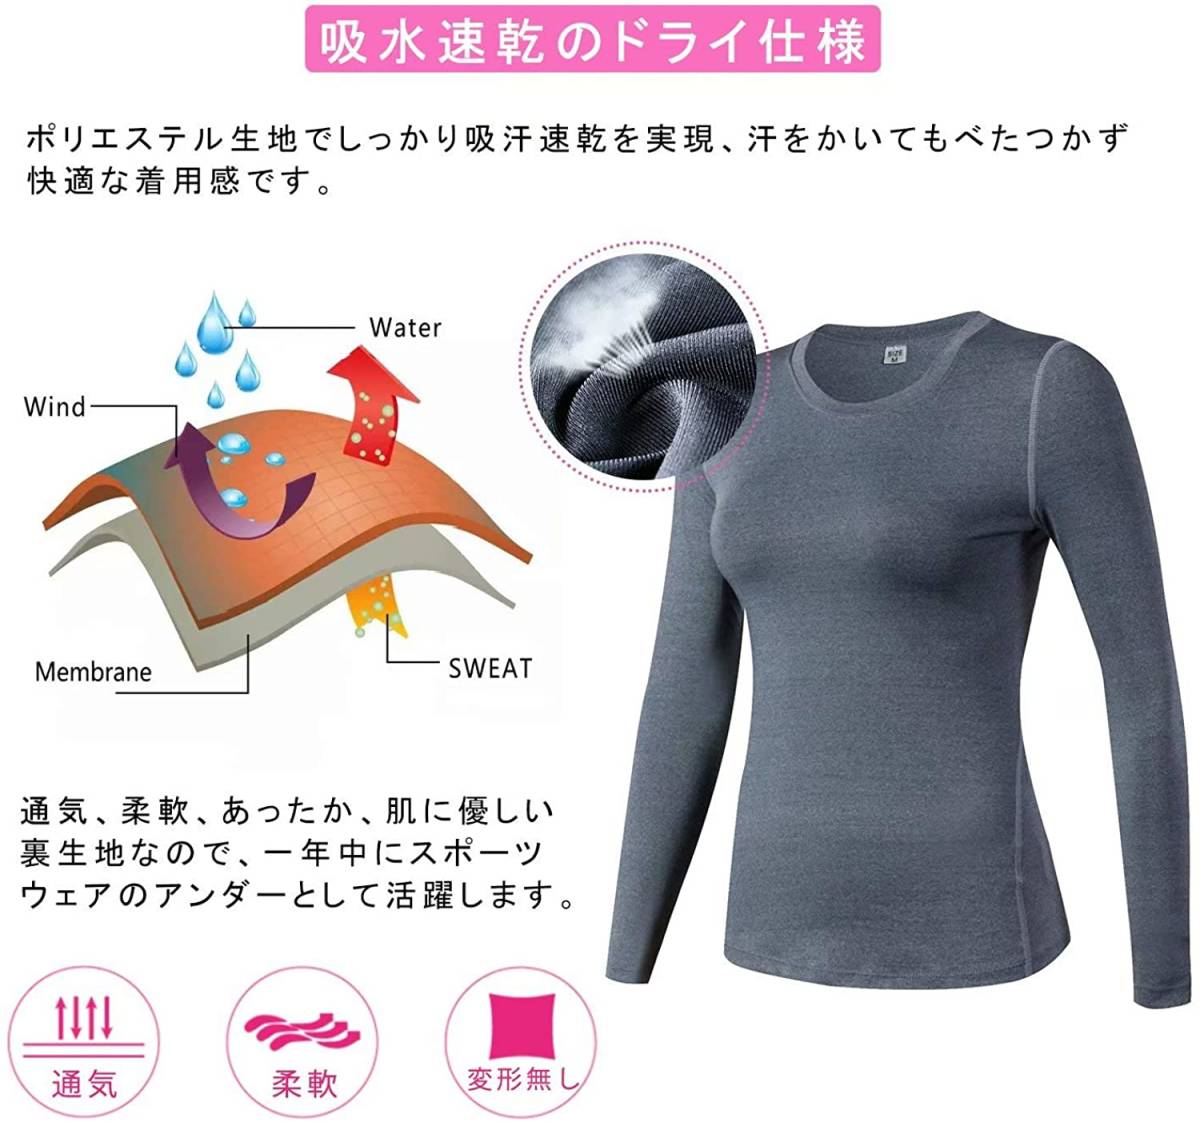 Nesseo sport shirt lady's inner long sleeve compression wear tops under [. sweat speed .* anti-bacterial deodorization ] 2019 gray S